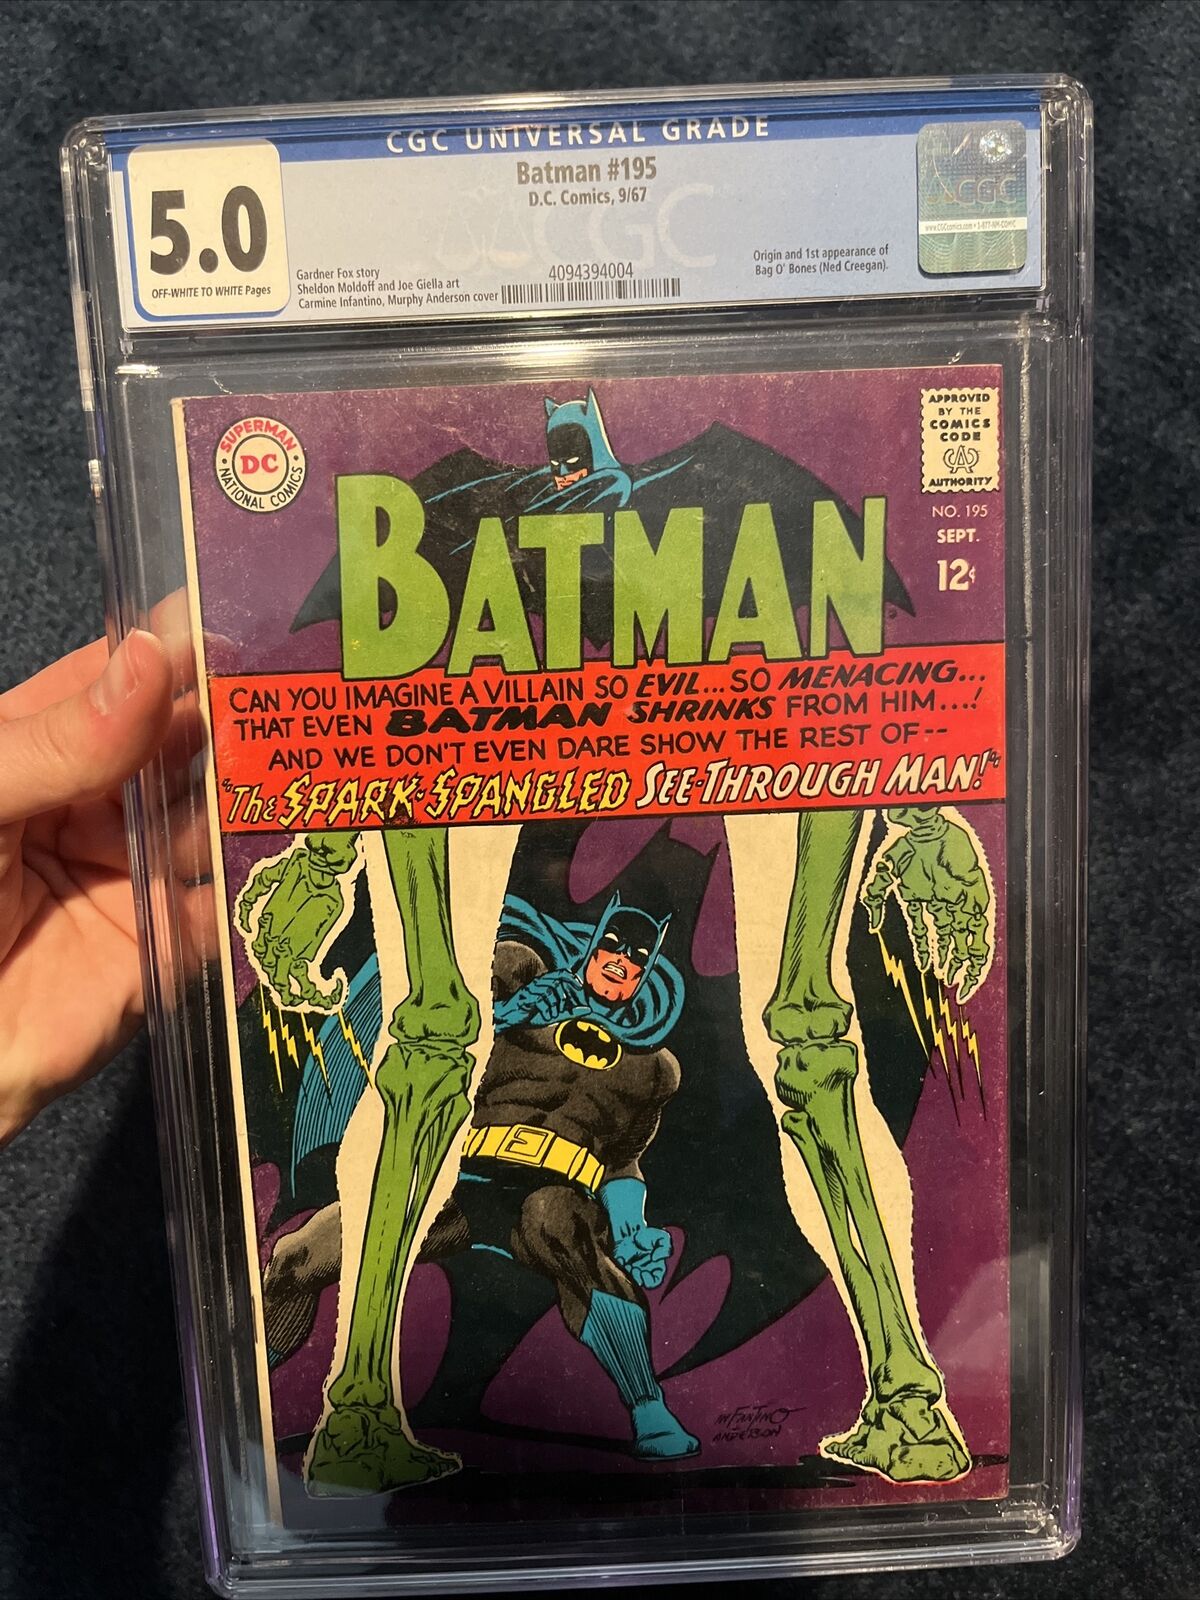 RARE Batman CGC Graded Comic #195 (1967) OFF-WHITE to WHITE Pages